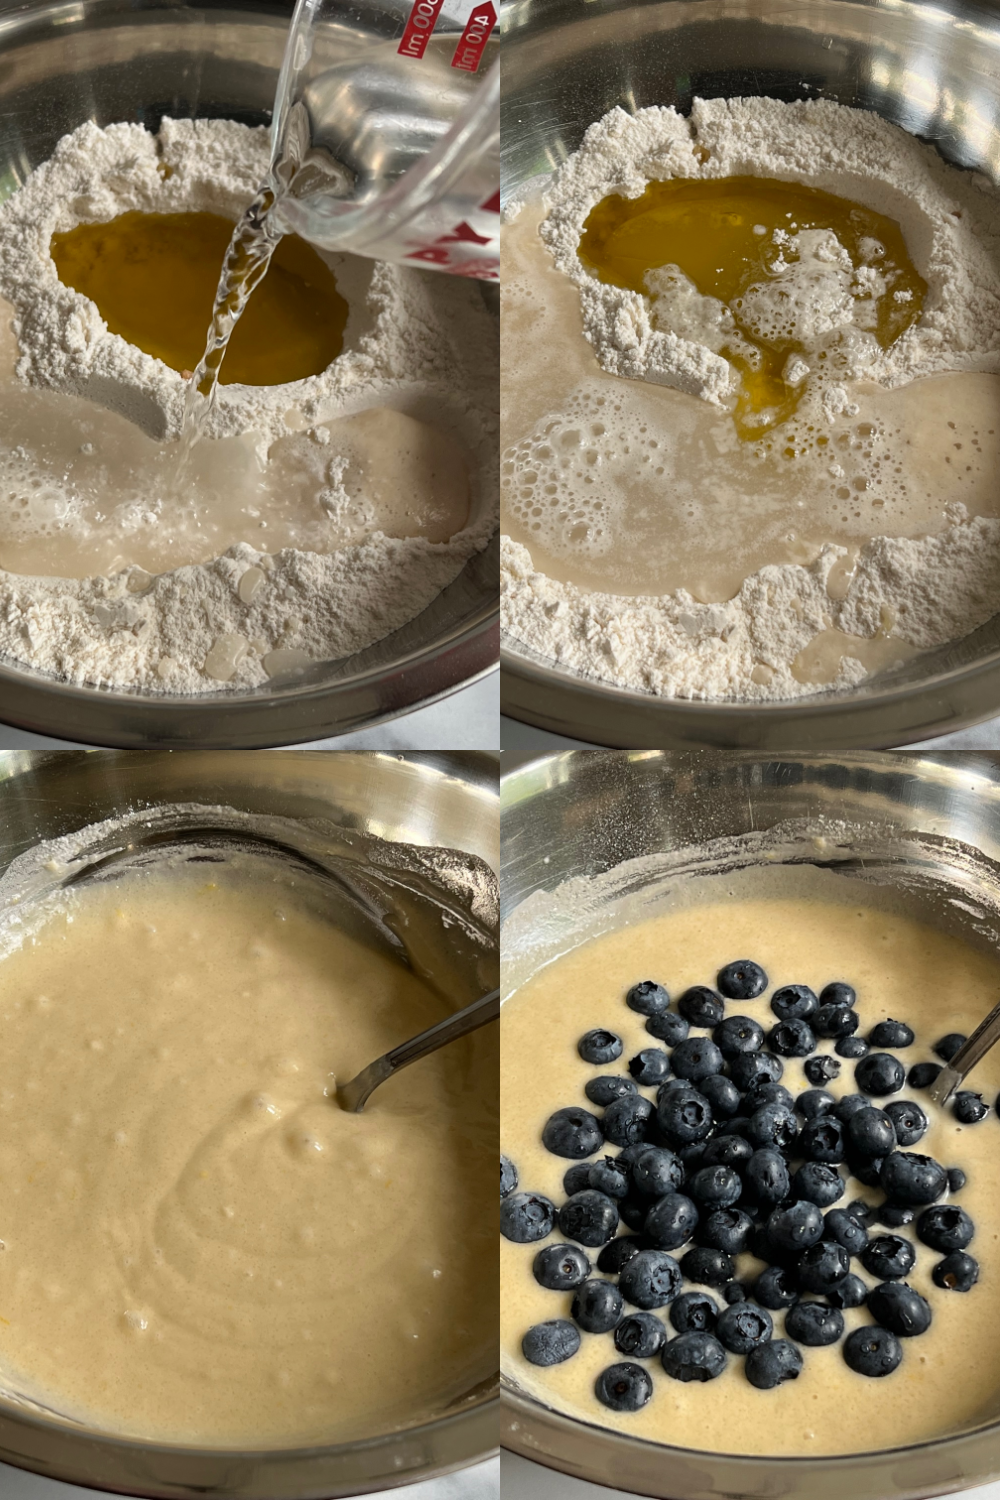 This is a four photo collage showing the cake batter being made in a large silver mixing bowl. 